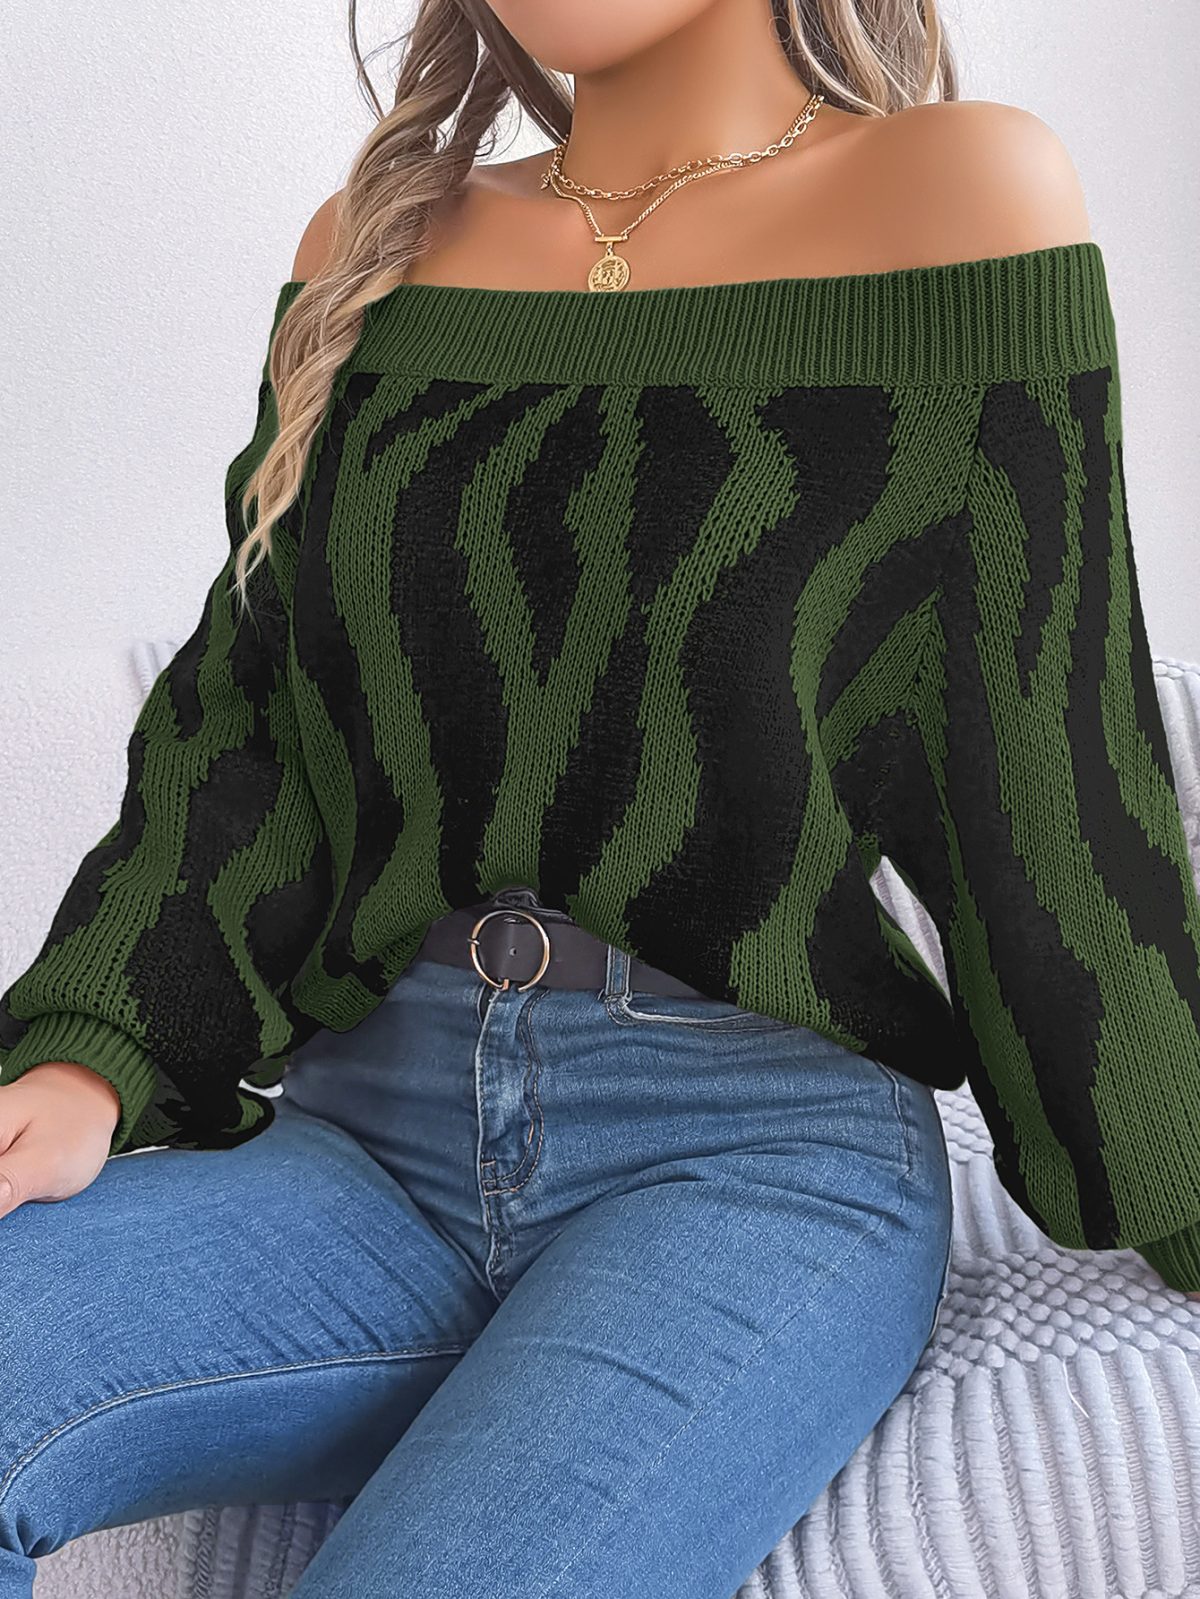 Contrast Color off Neck off the Shoulder Lantern Sleeve Sweater in Sweaters